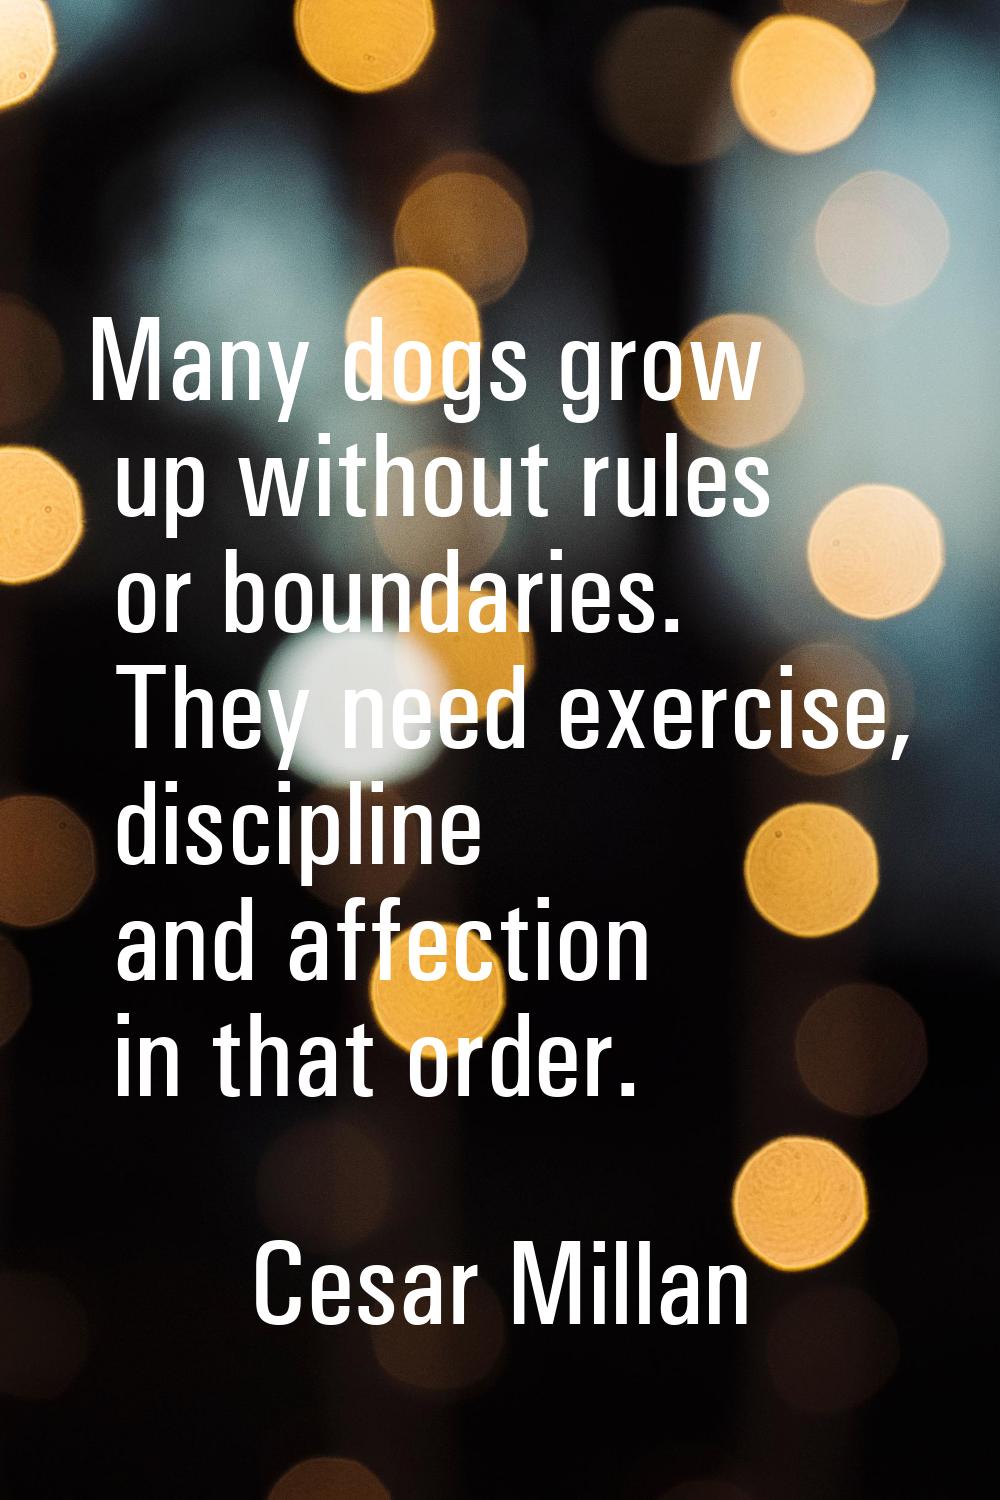 Many dogs grow up without rules or boundaries. They need exercise, discipline and affection in that